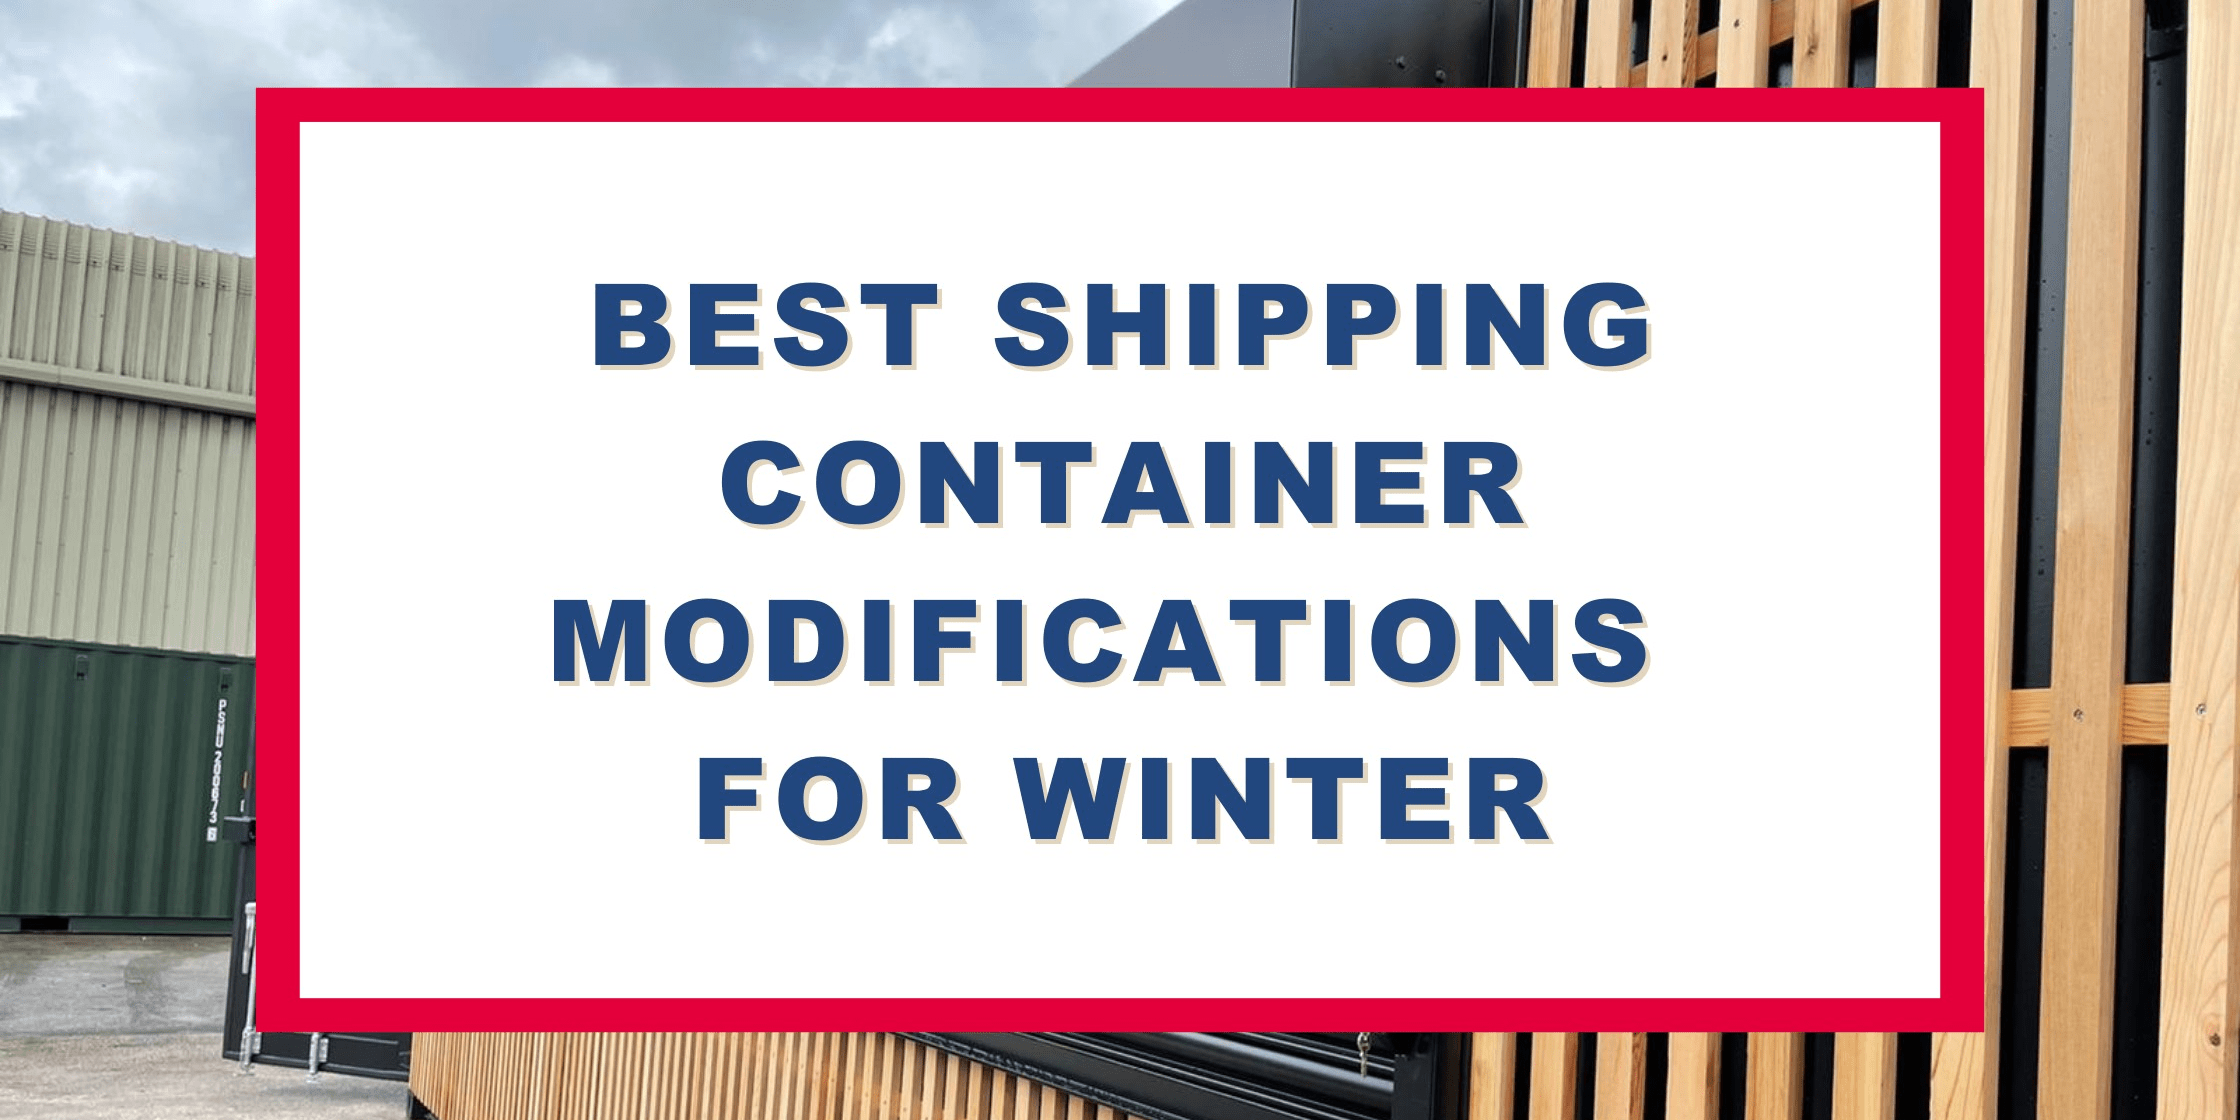 Best Shipping Container Modifications for Winter